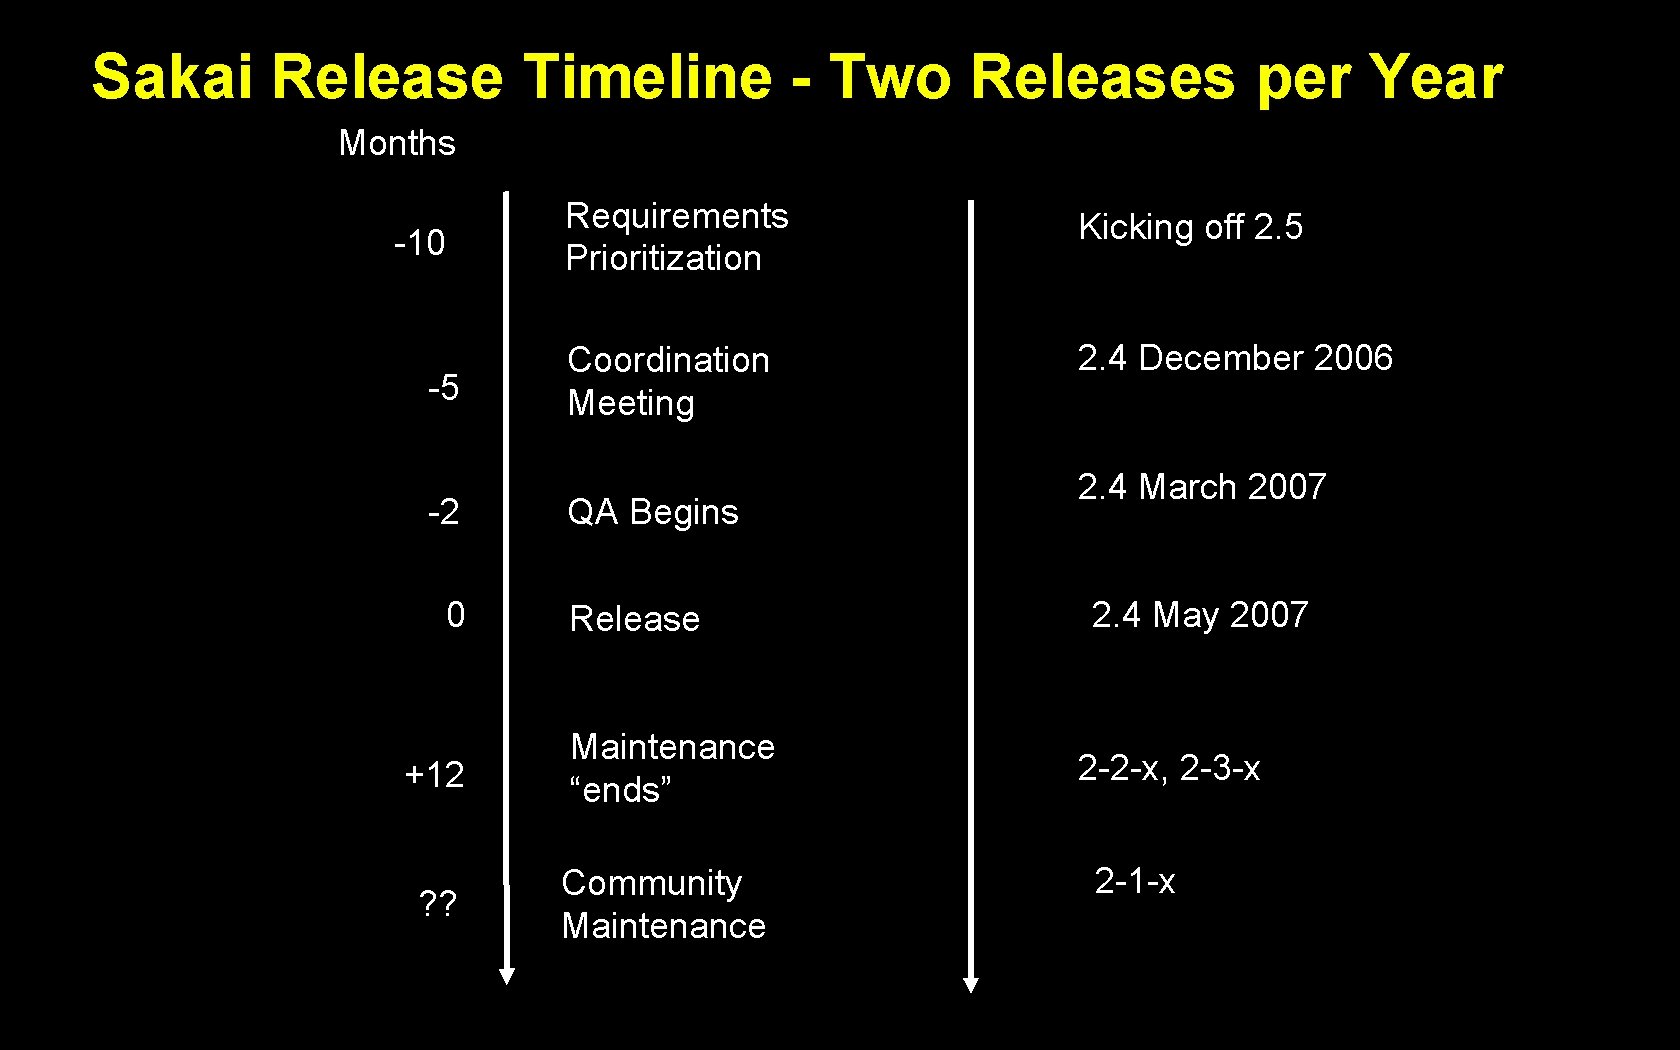 Sakai Release Timeline - Two Releases per Year Months -10 -5 -2 0 +12